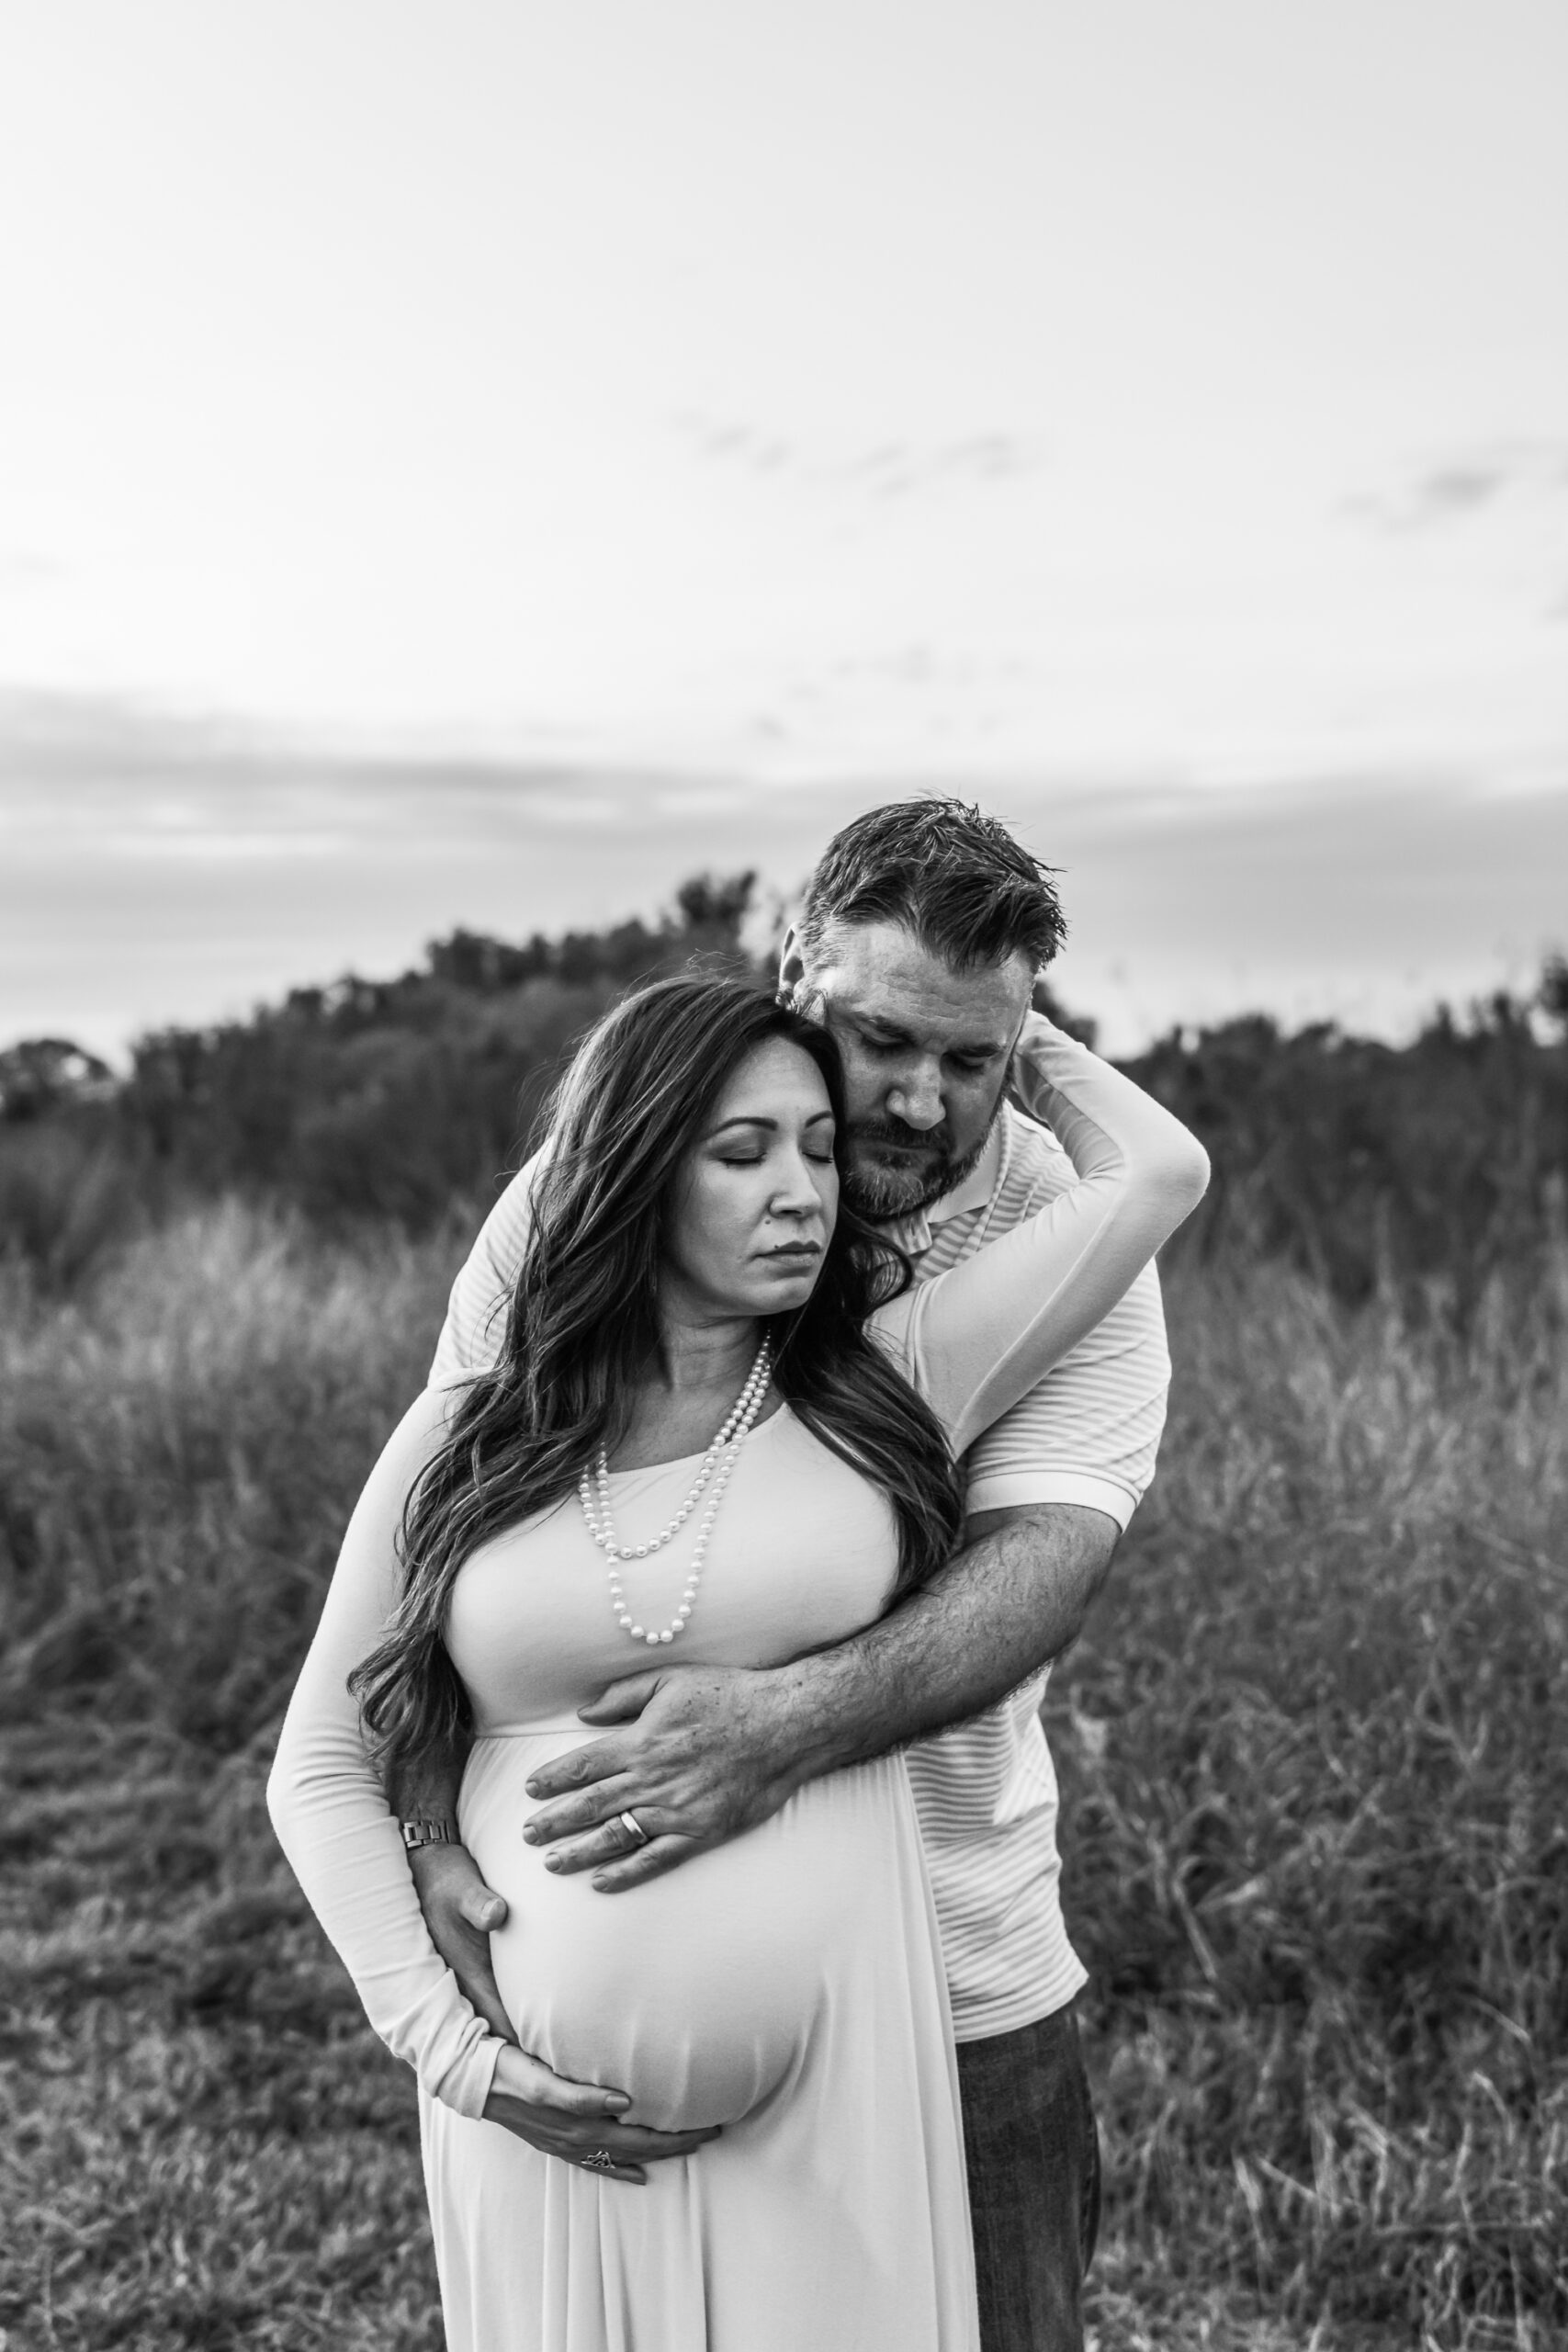 Allys photography capturing mom to be with her husband, dreaming about their growing baby while embracing each other in a field.